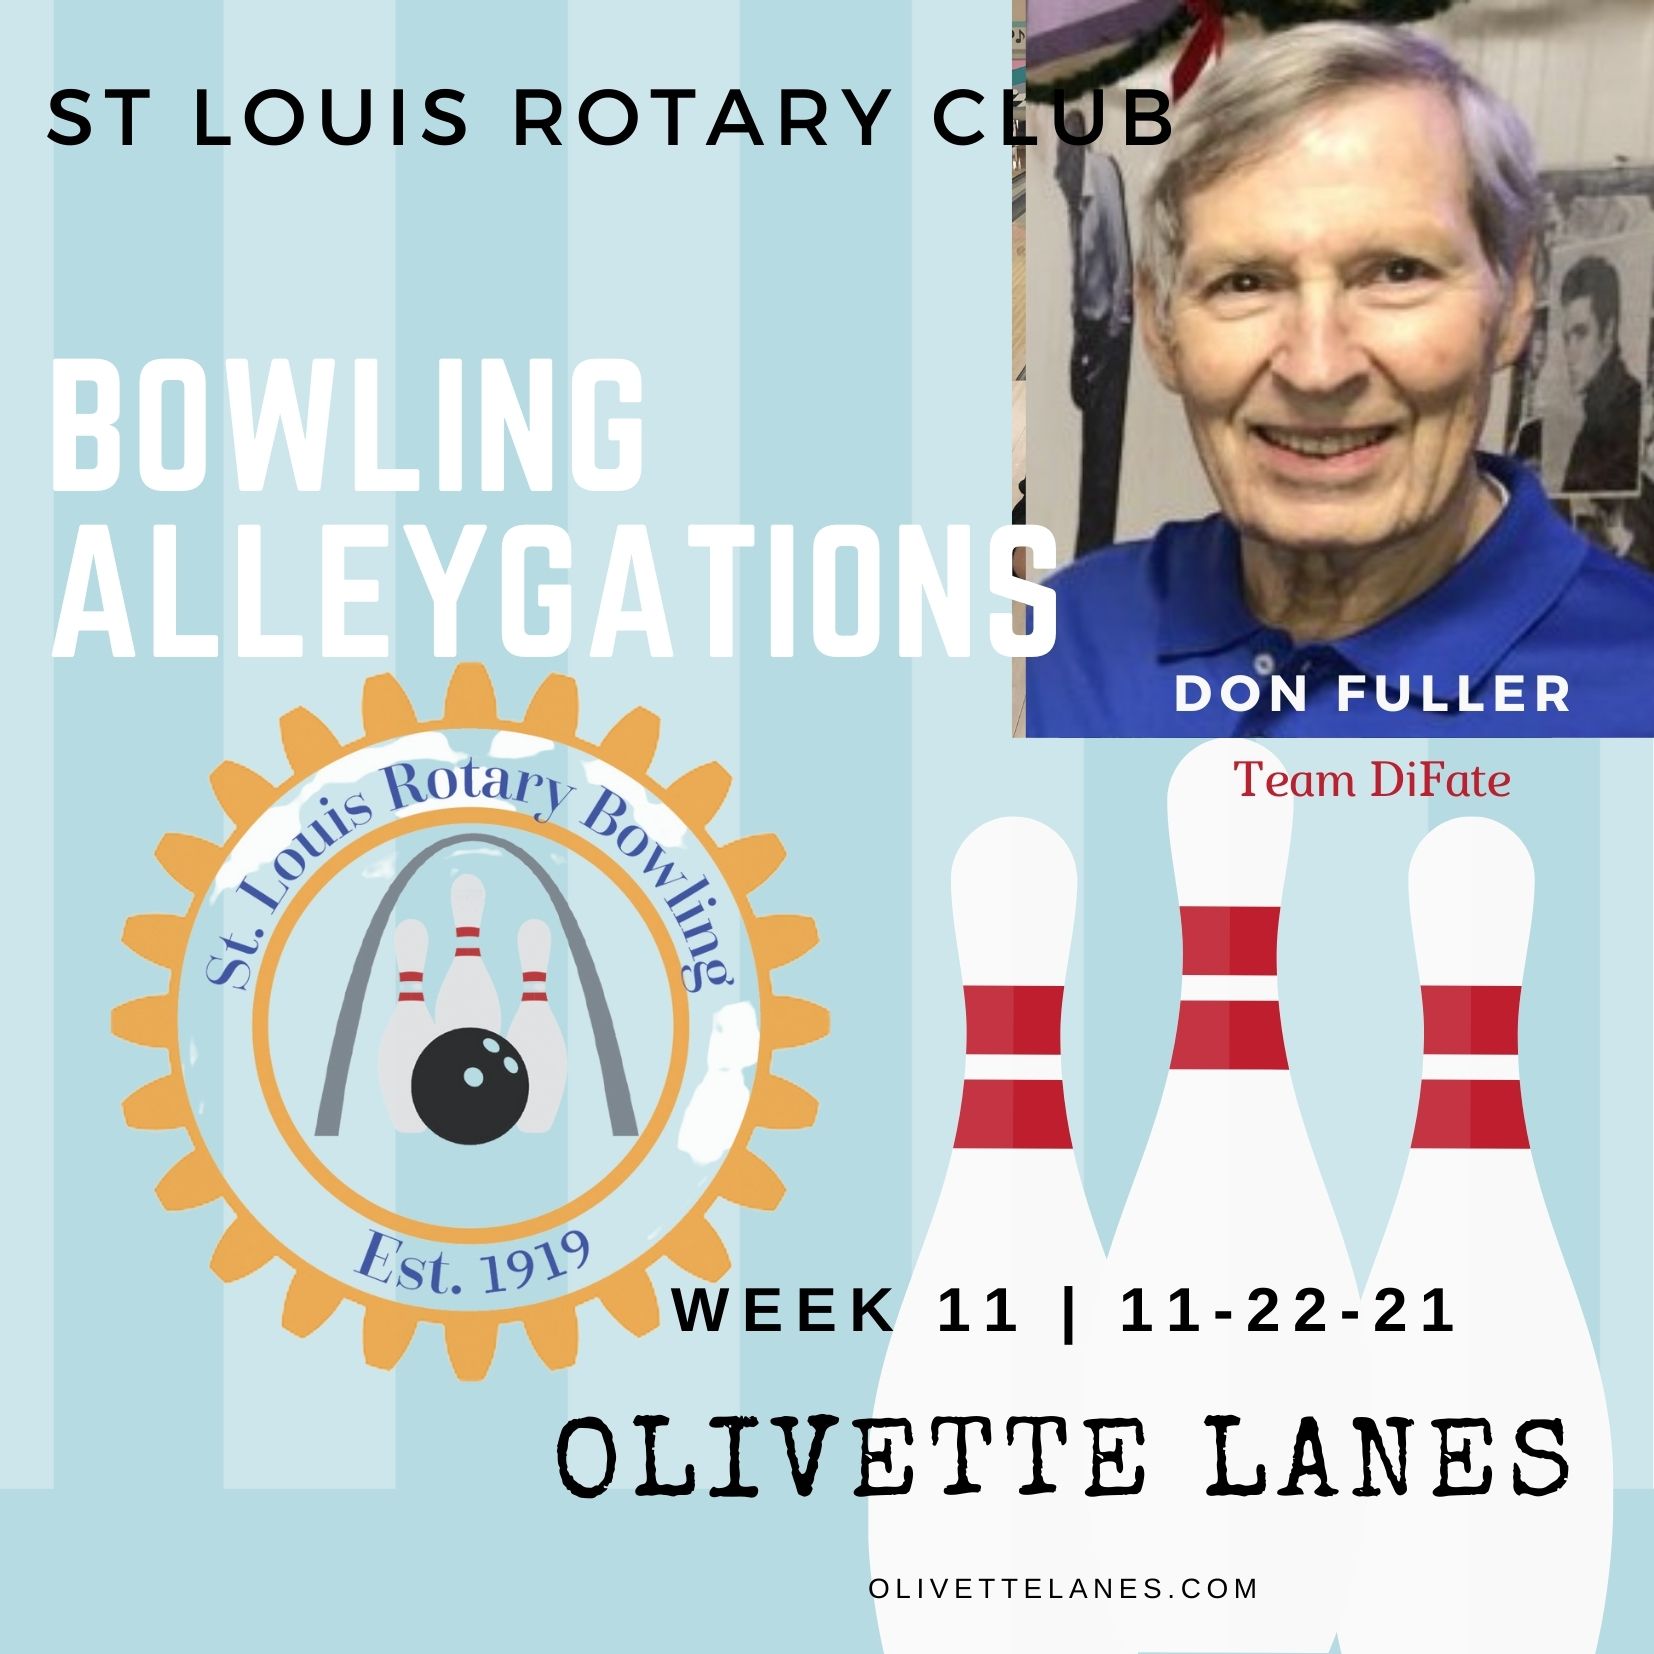 Bowling Alleygations Week 11 _ 11-22-21